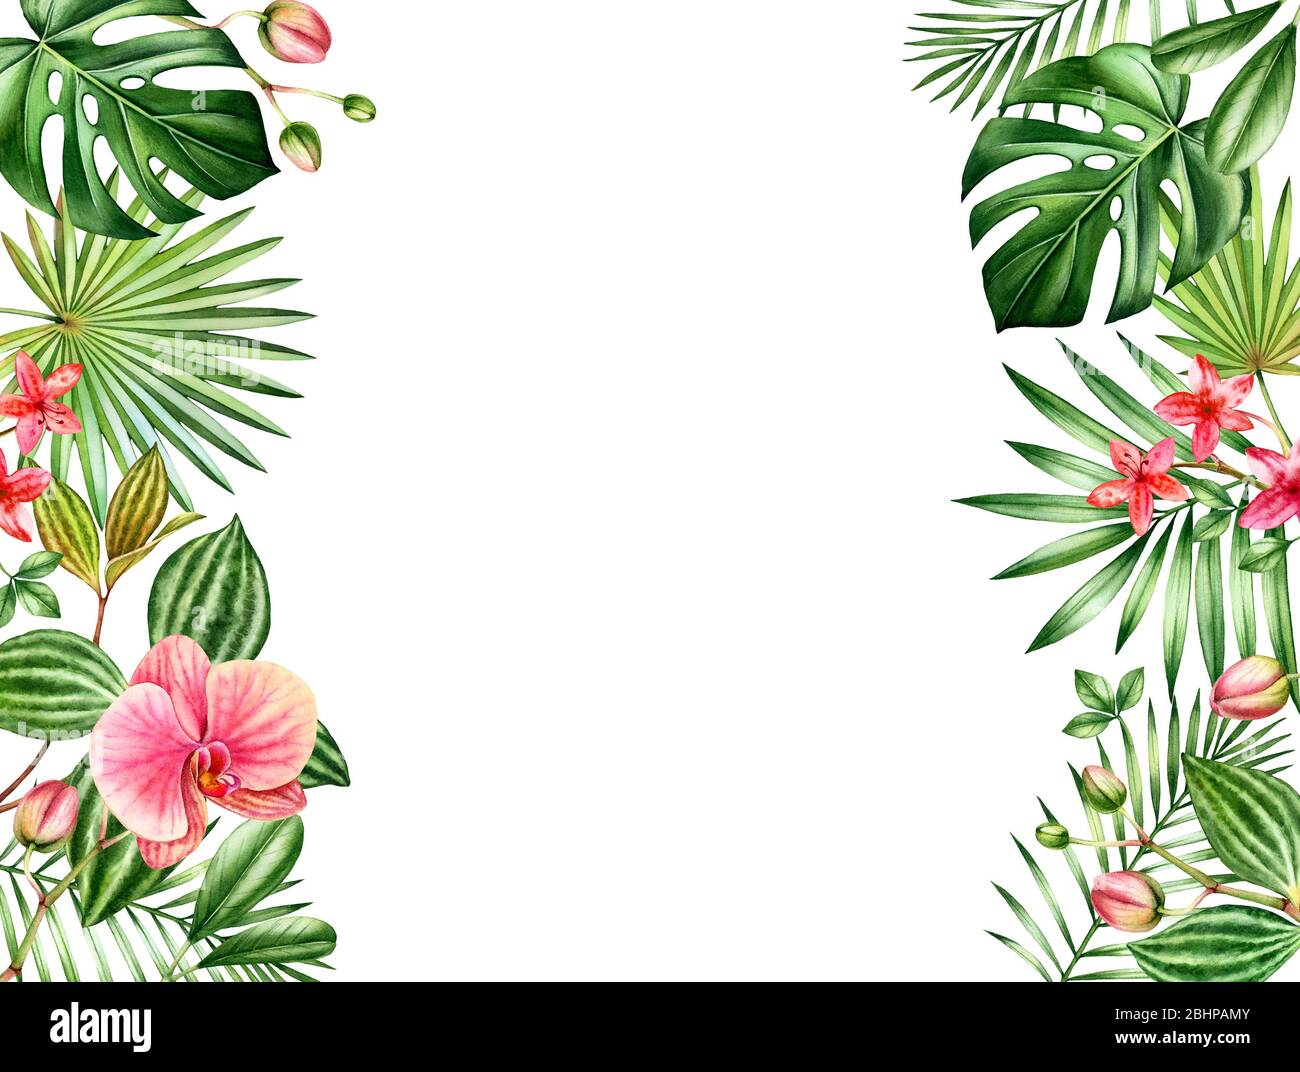 Watercolor Floral Background Horizontal Frame With Place For Text Floral Borders On The Sides Red Orchid Flowers And Palm Monstera Leaves Stock Photo Alamy